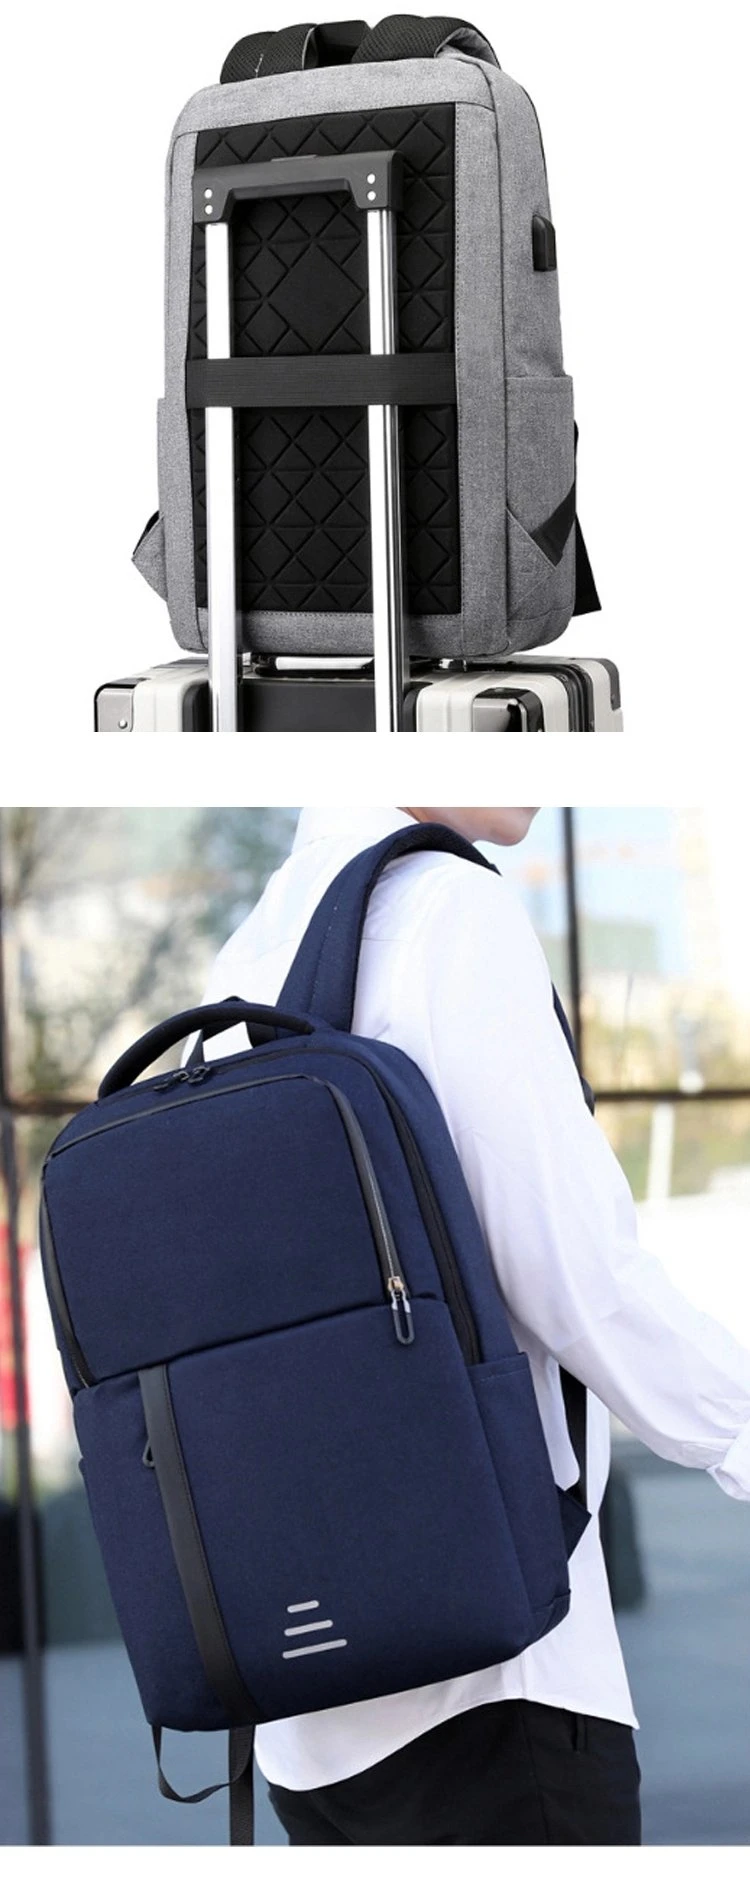 USB Charger Backpack Business Men Daily Work Laptop Backpack with Reflective Strap Travel Bag